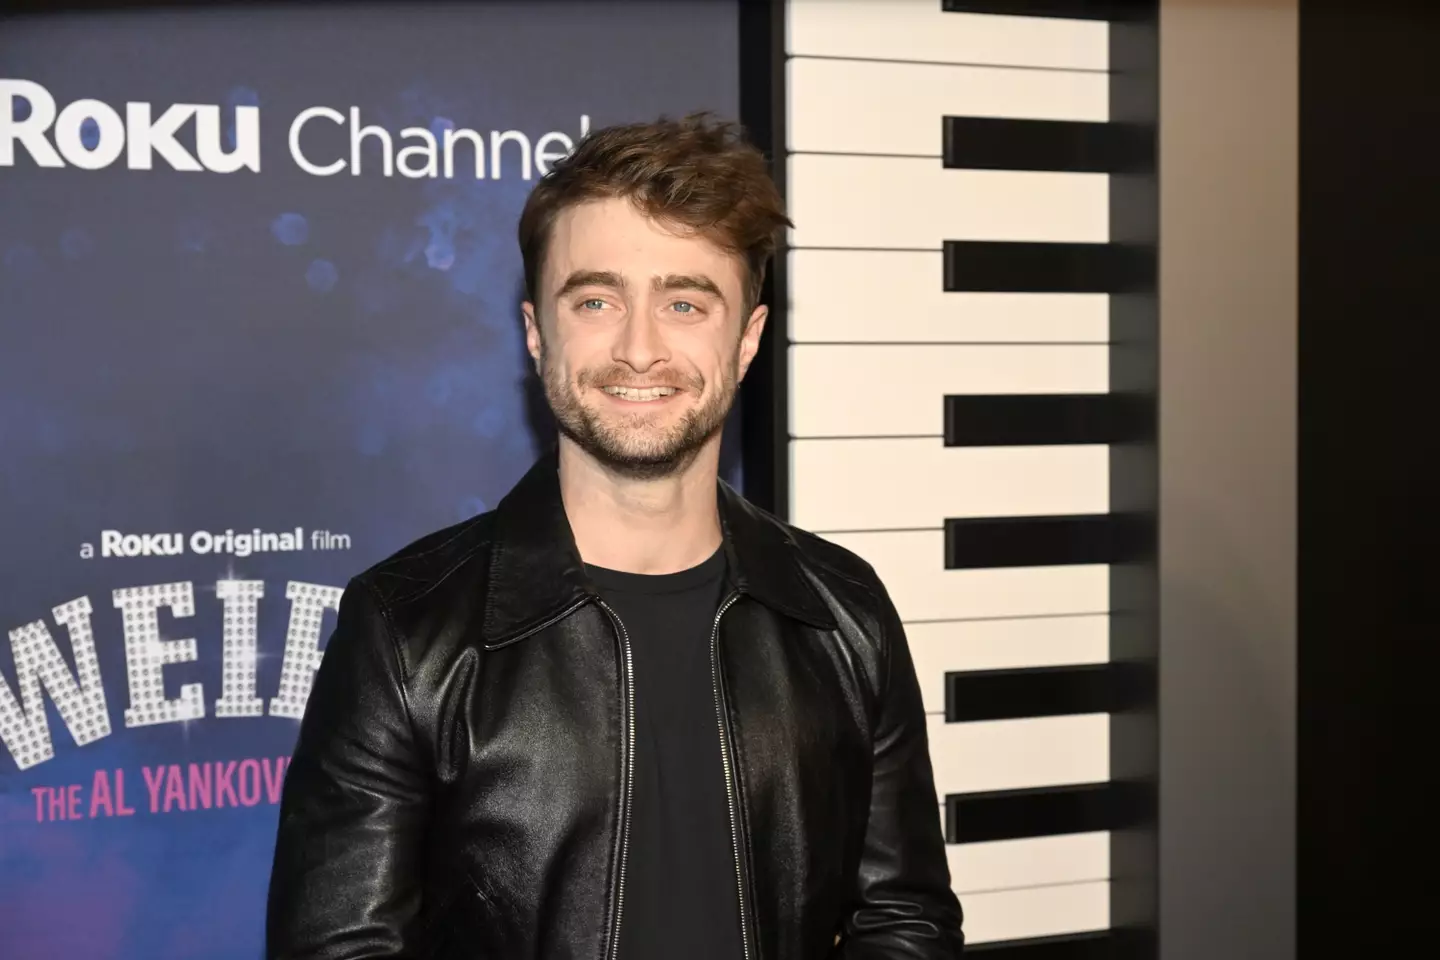 Understandably, a lot of fans want Daniel Radcliffe in the live-action series.